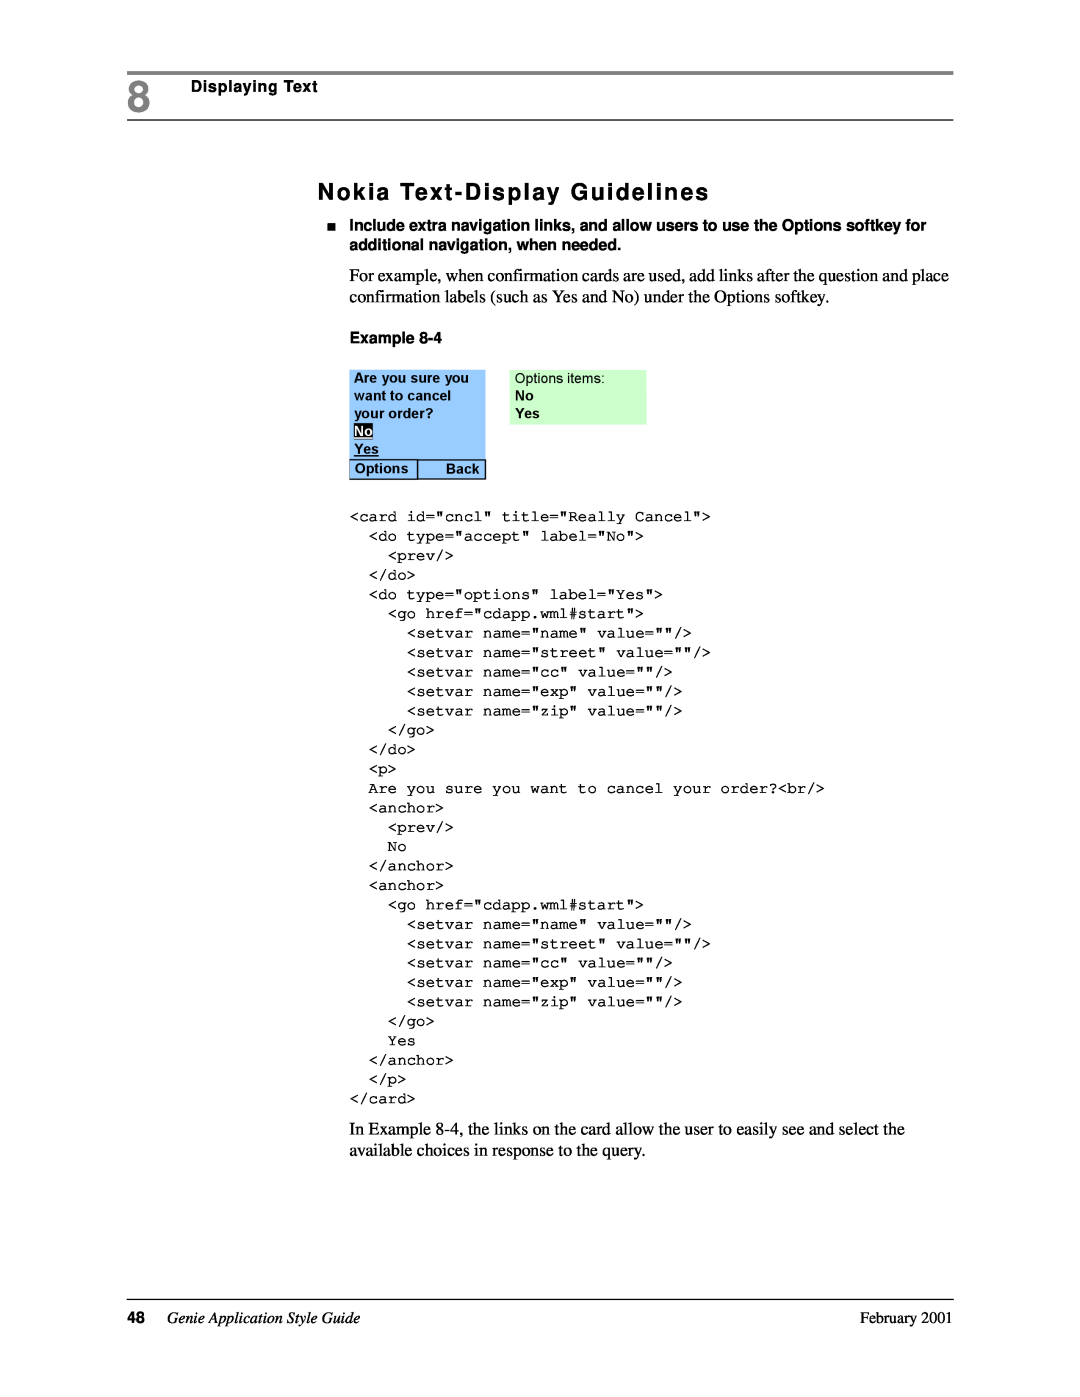 Genie 7110 manual Nokia Text - Display Guidelines, Genie Application Style Guide 